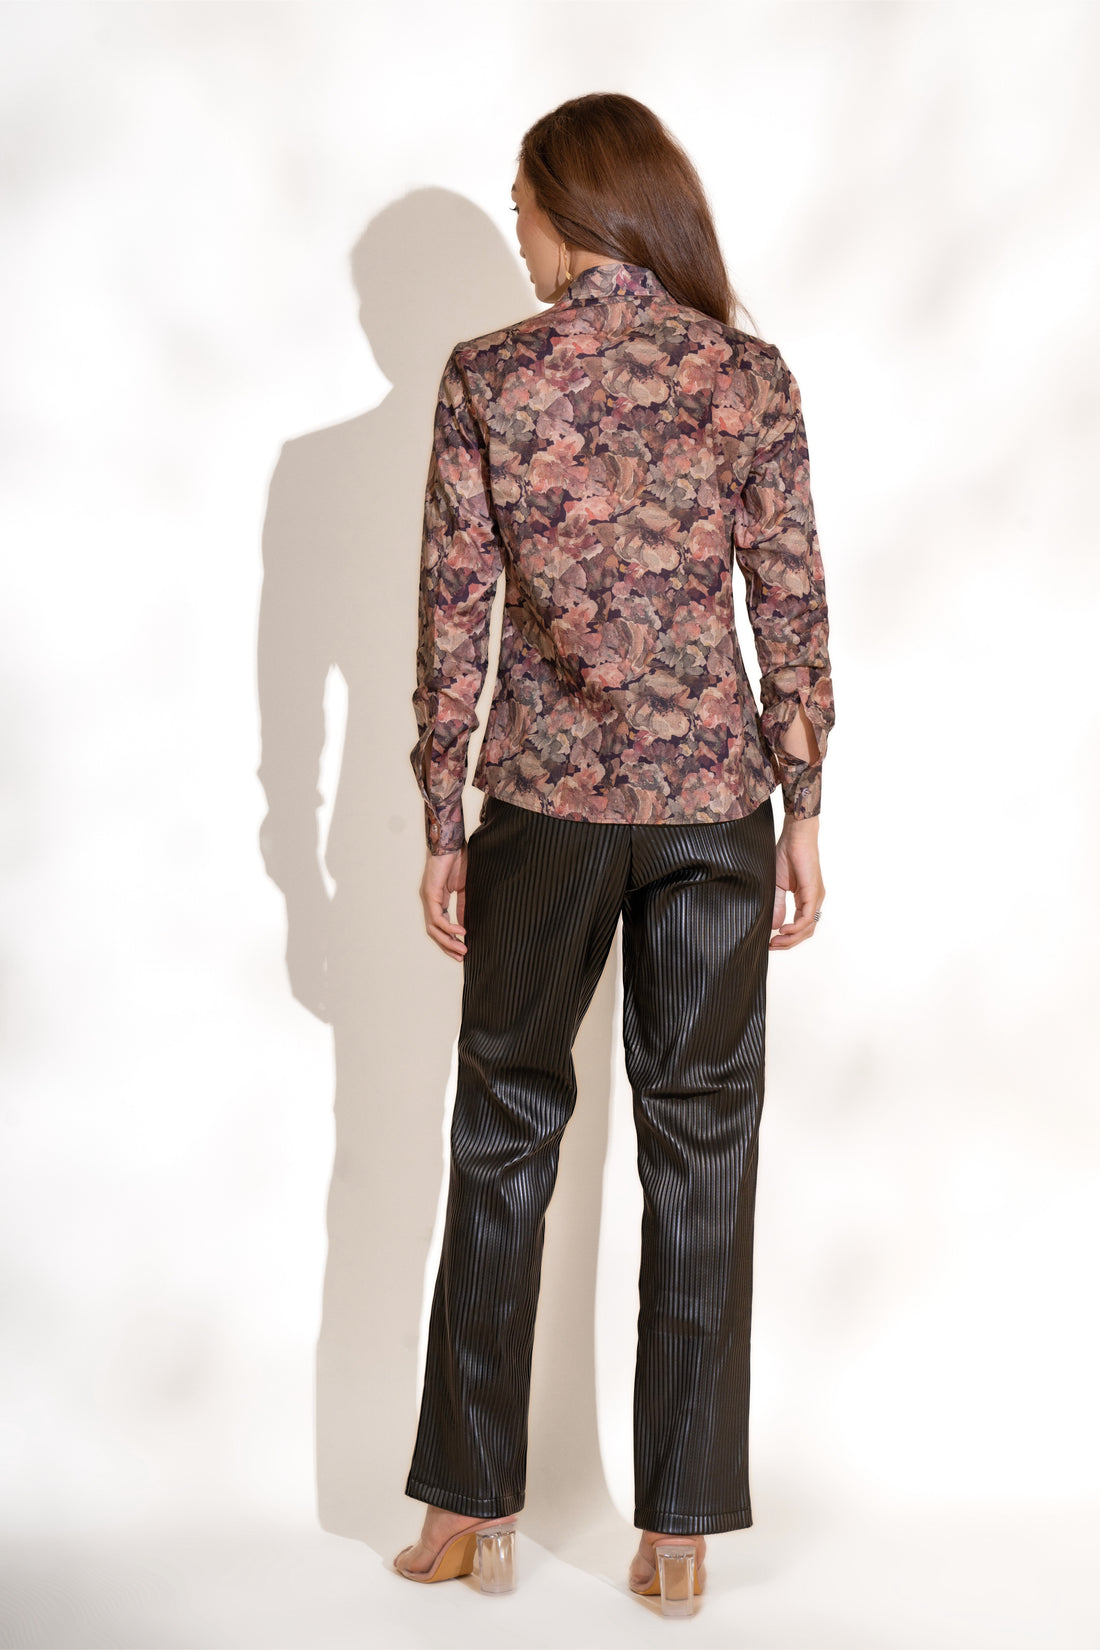 Mulberry Printed Shirt and Black Pleated Pants Co-ord Set